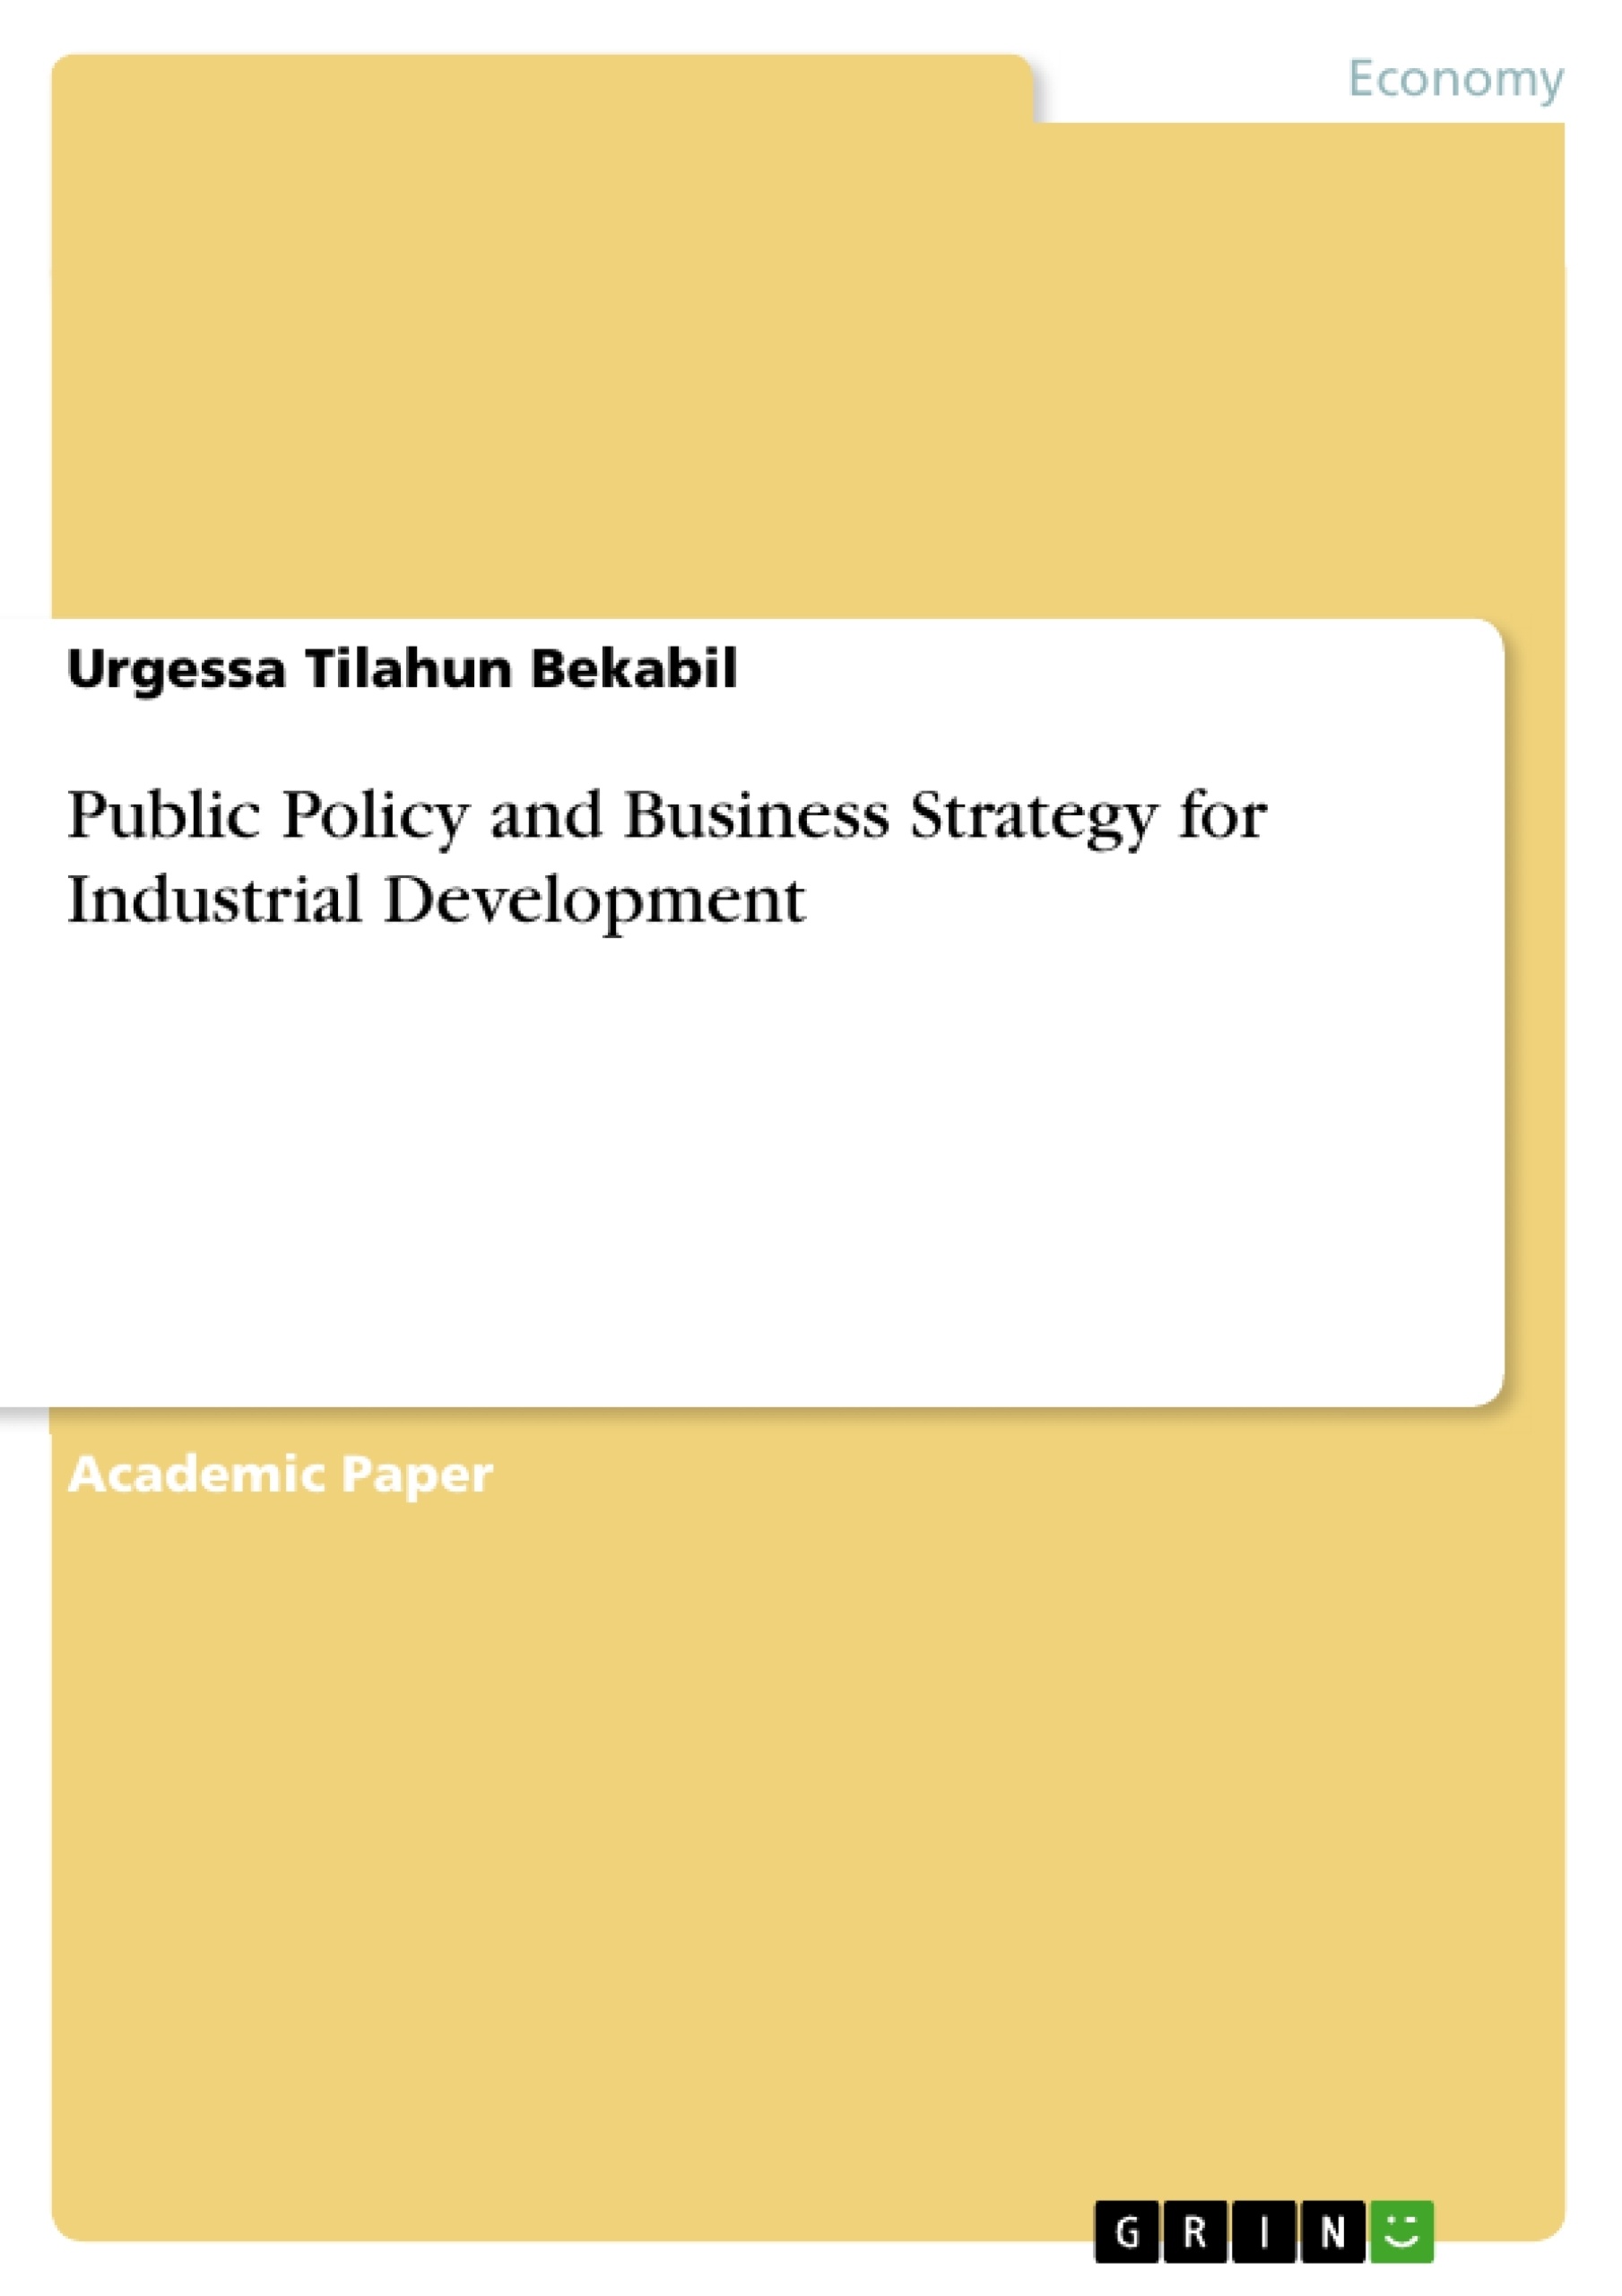 Title: Public Policy and Business Strategy for Industrial Development